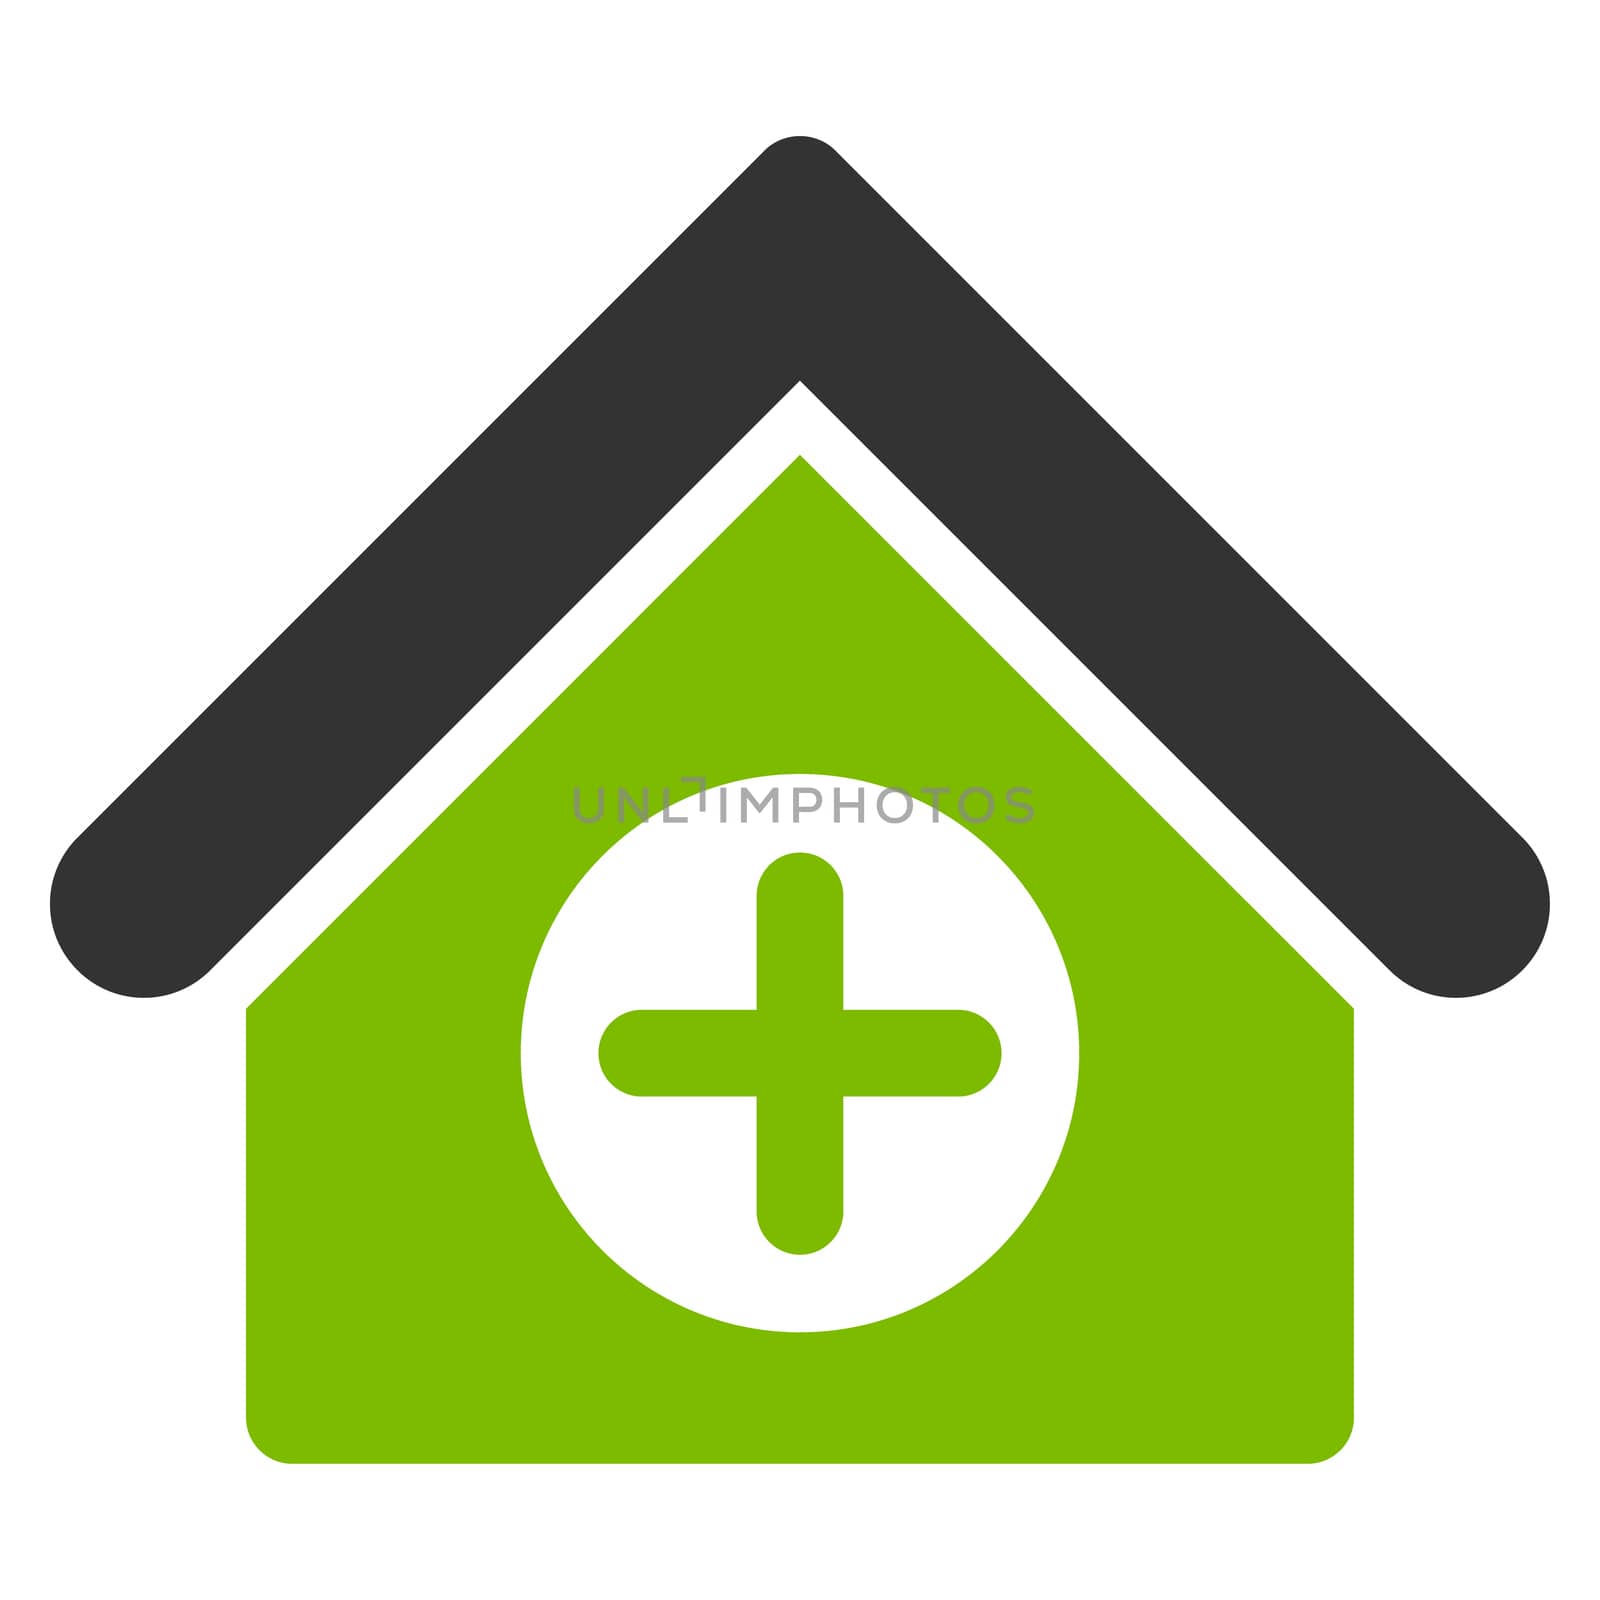 Hospital raster icon. Style is bicolor flat symbol, eco green and gray colors, rounded angles, white background.